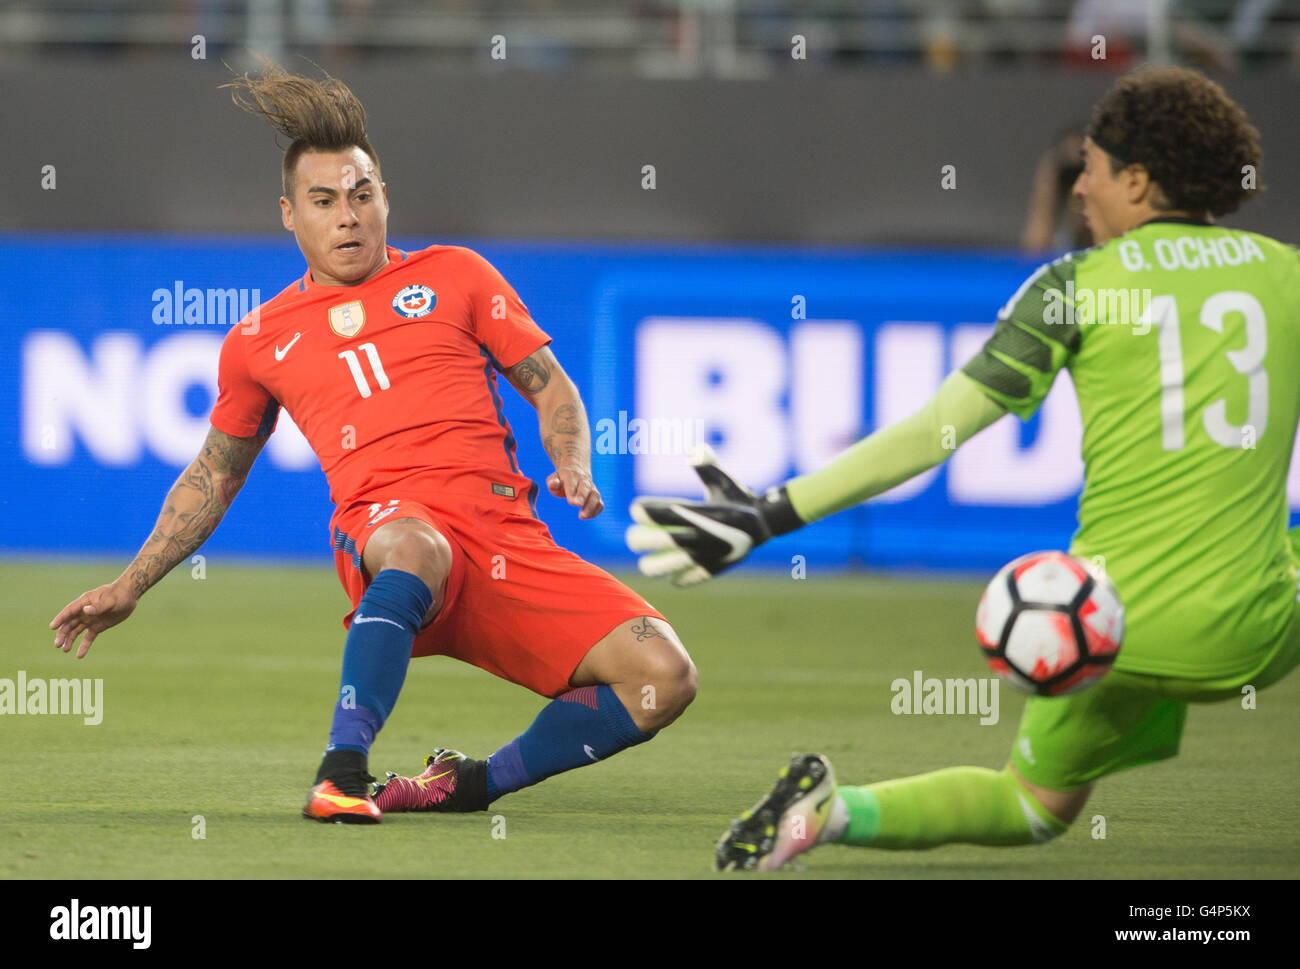 Santa Clara, USA. 18th June, 2016. Eduardo Vargas (L) of Chile scores during the quarterfinal match against Mexico of 2016 Copa America soccer tournament at the Levi's Stadium in Santa Clara, California, the United States, June 18, 2016. Chile won 7-0. Credit:  Yang Lei/Xinhua/Alamy Live News Stock Photo